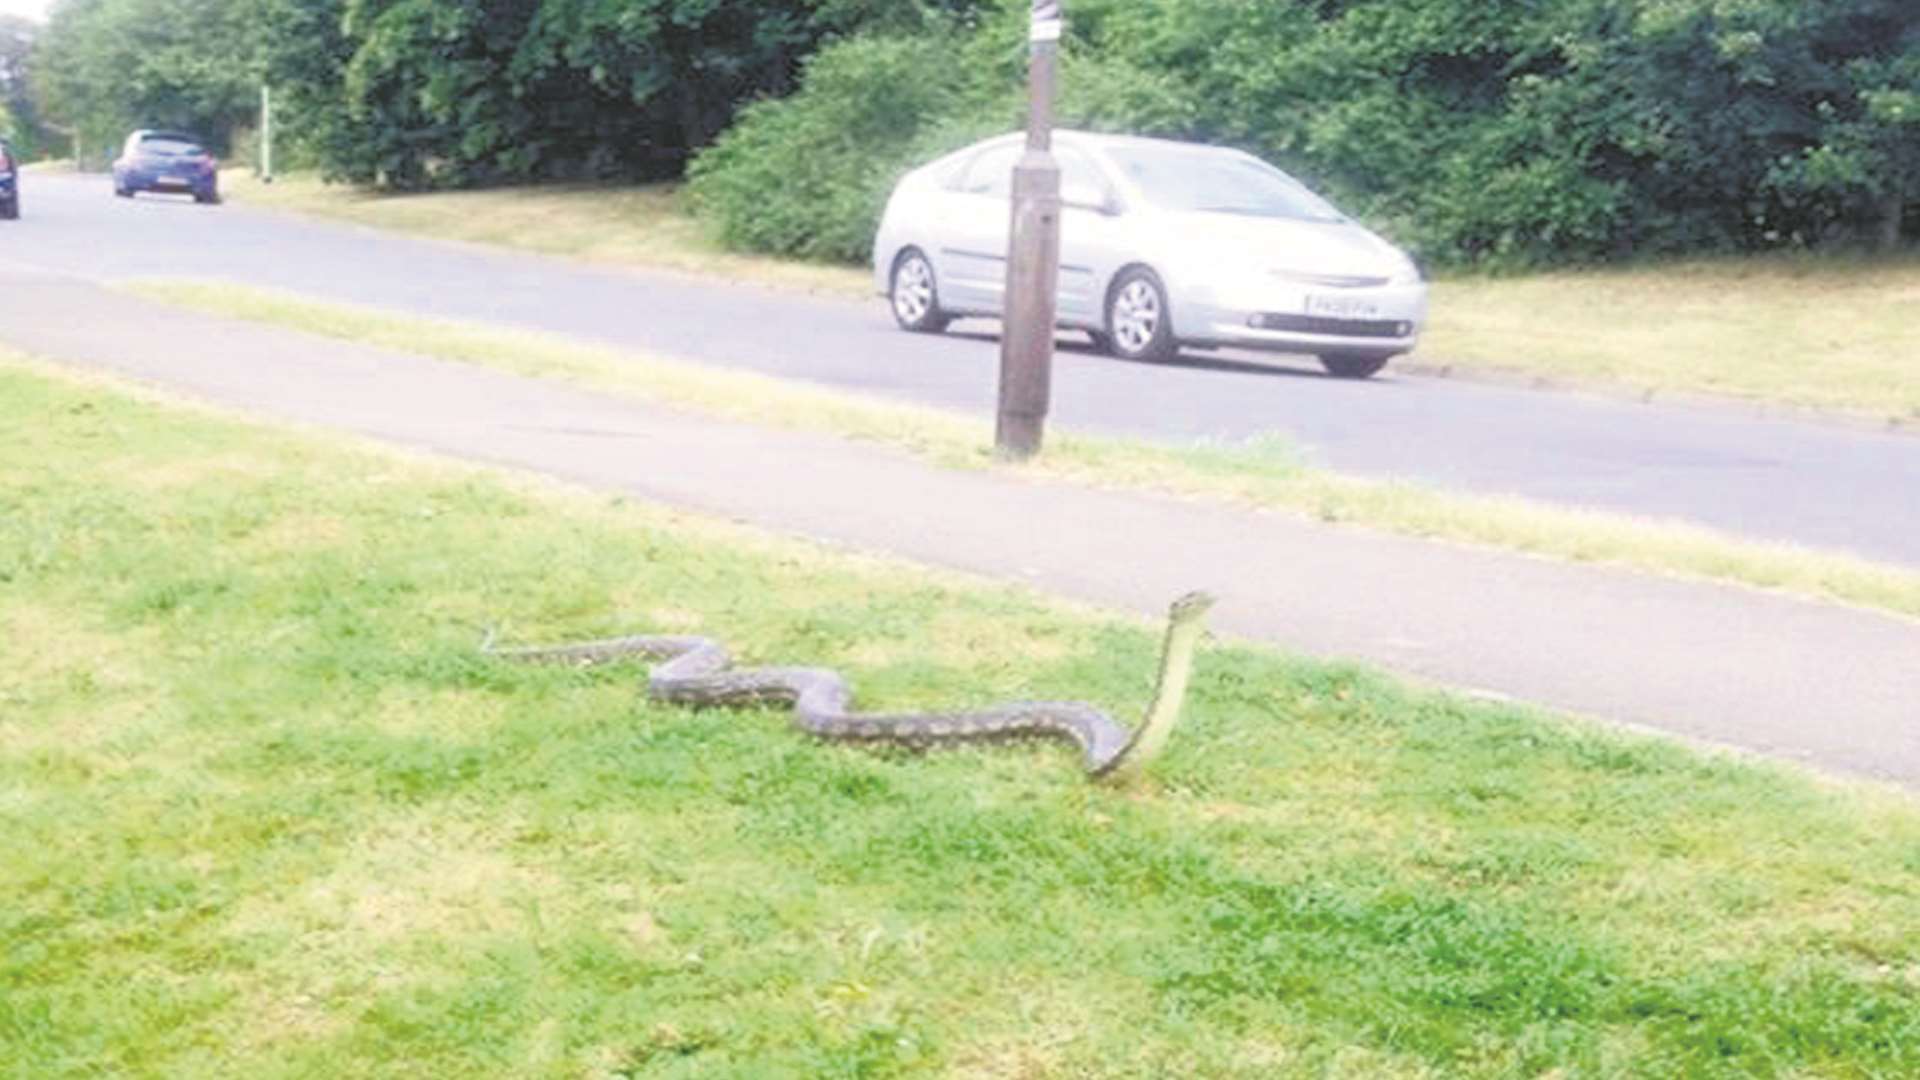 The snake was on the loose in Larkfield. Picture: Sarah Bick